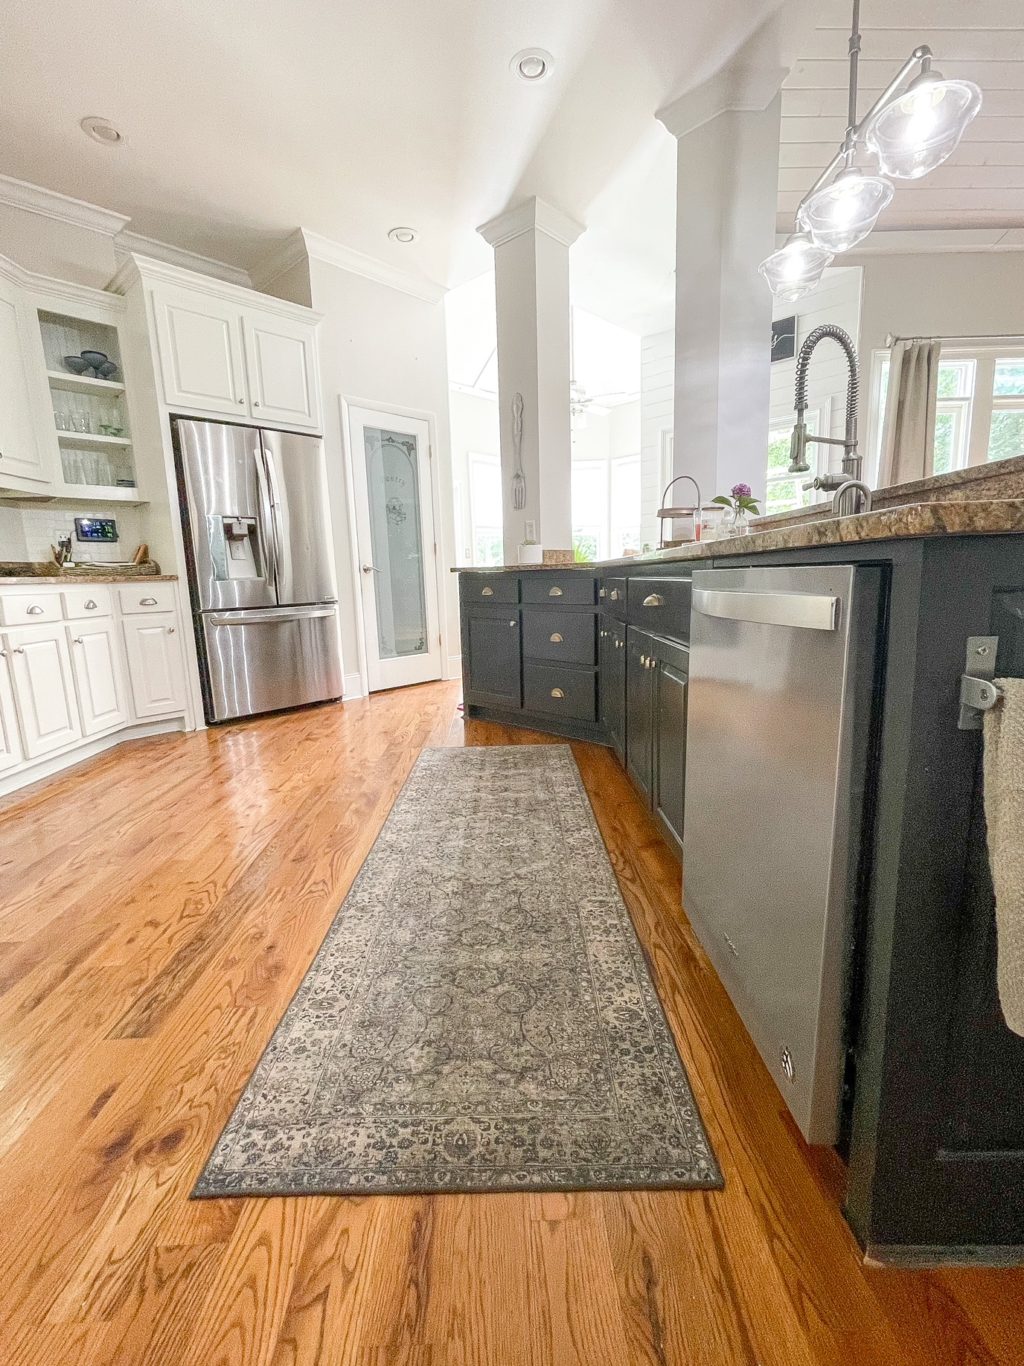 tips on how to care for area rugs including blue runner in the kitchen